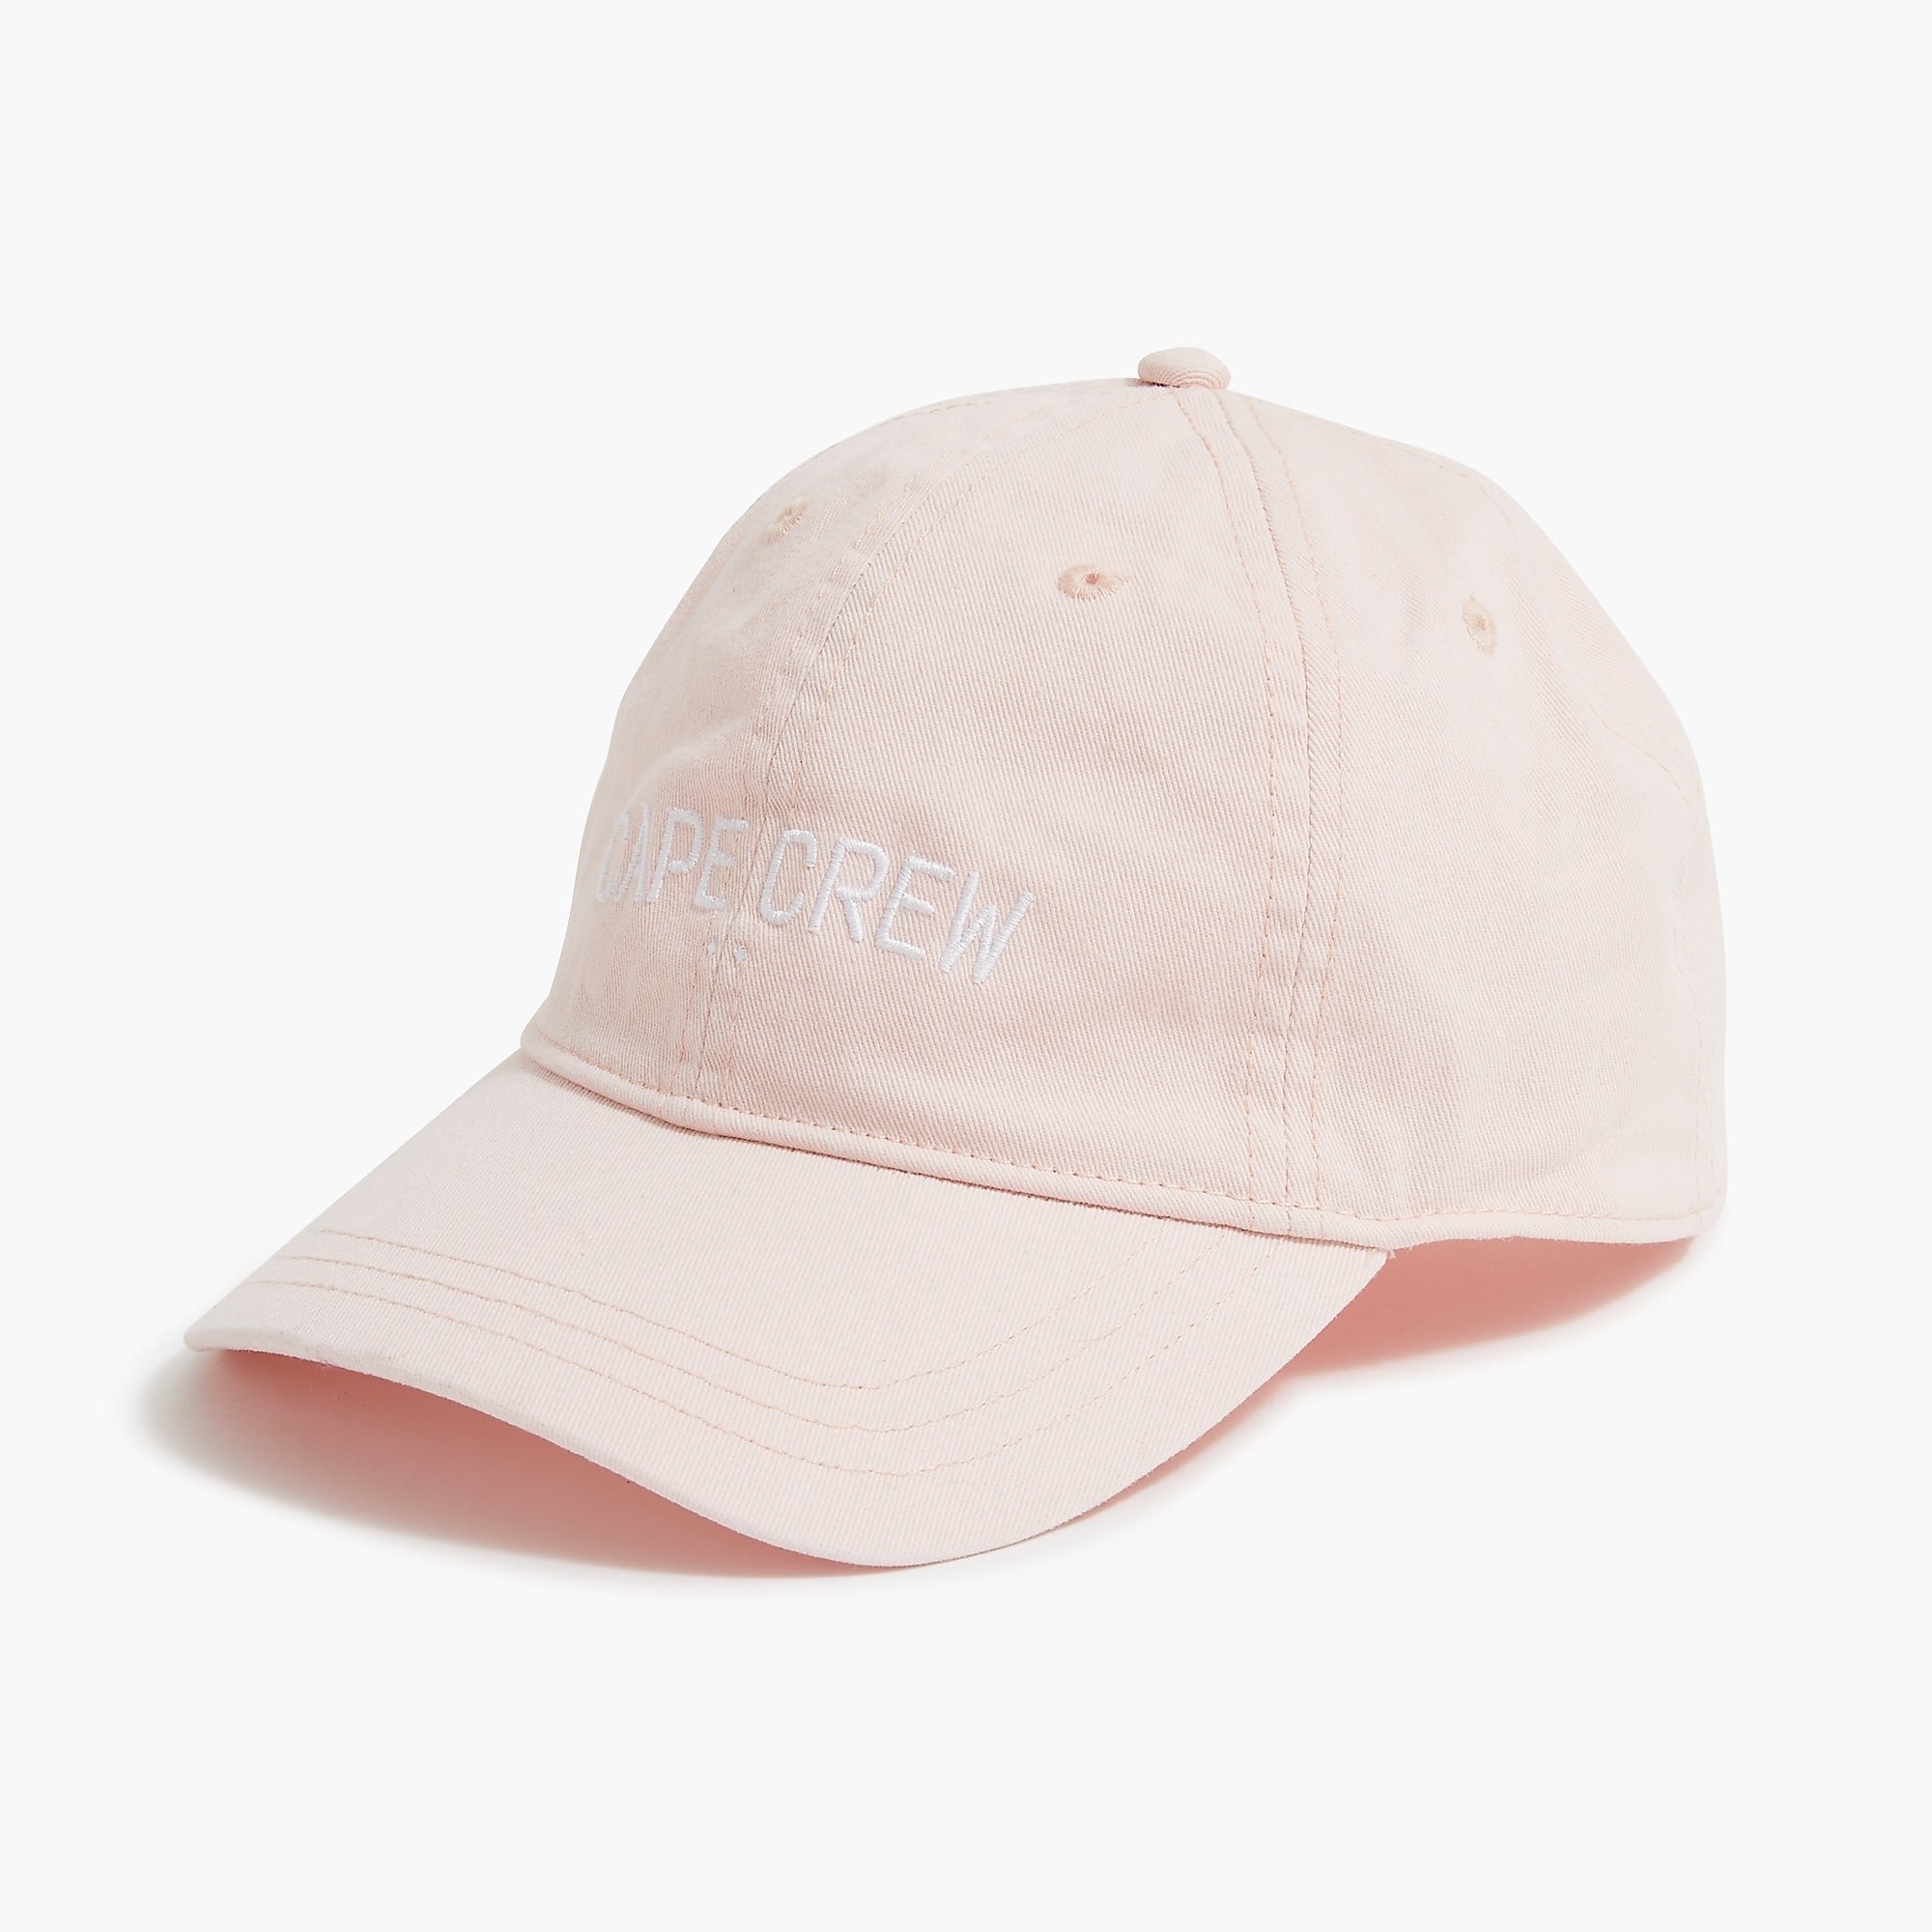 An image of a pink cotton baseball cap with a &quot;cape crew&quot; slogan